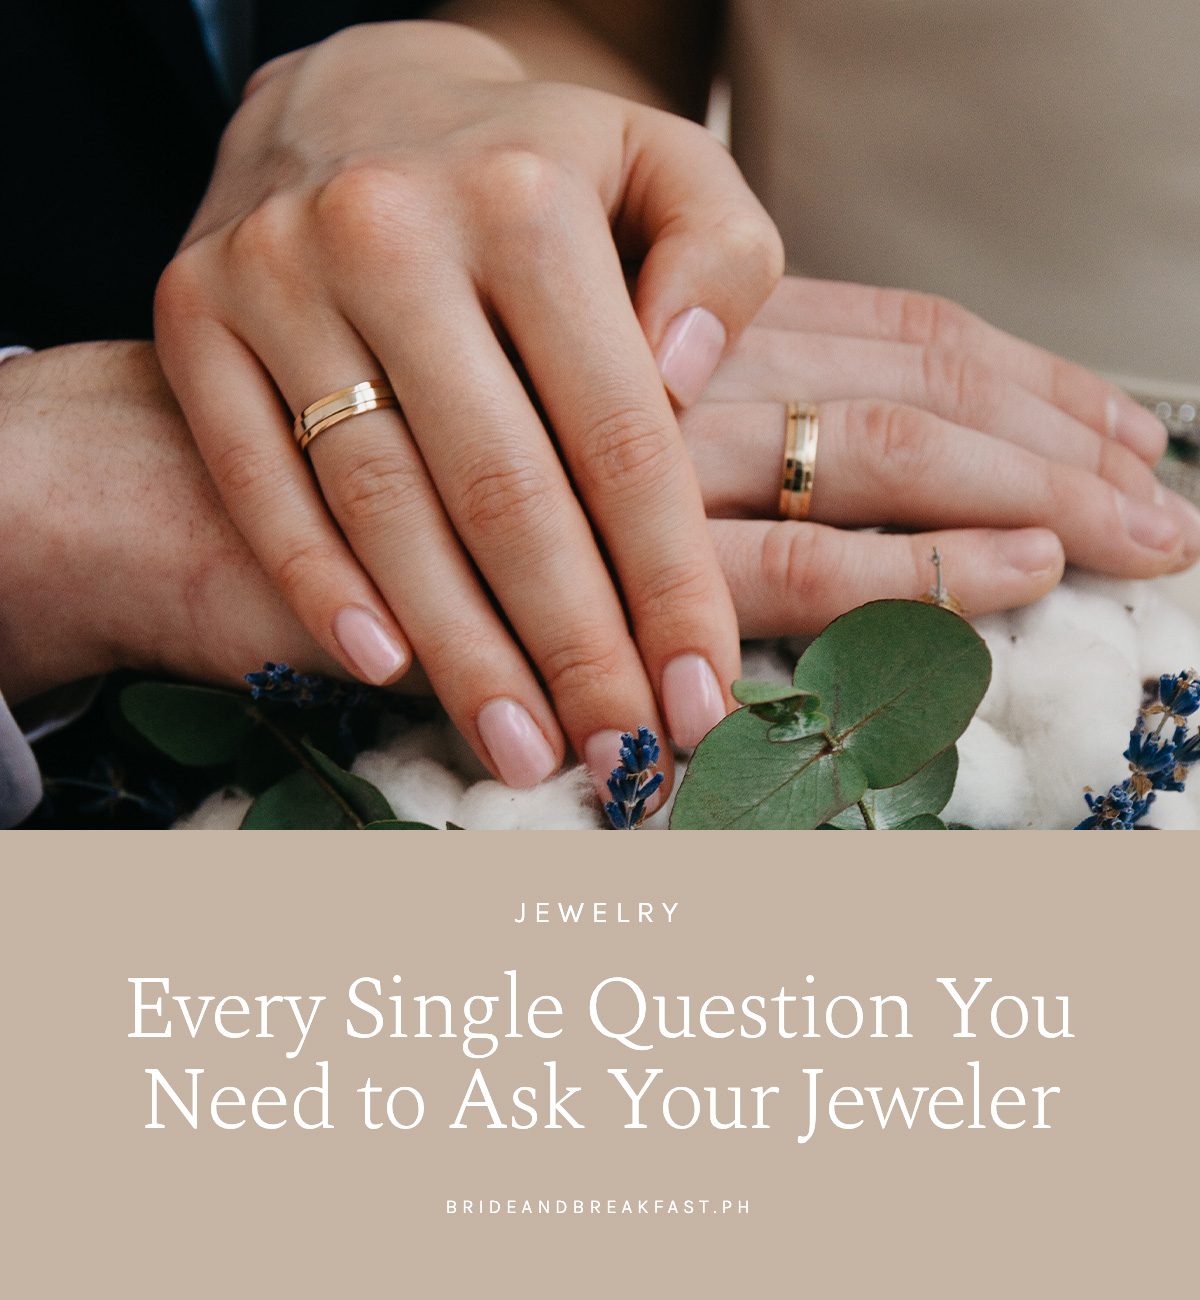 Every Single Question You Need to Ask Your Jeweler